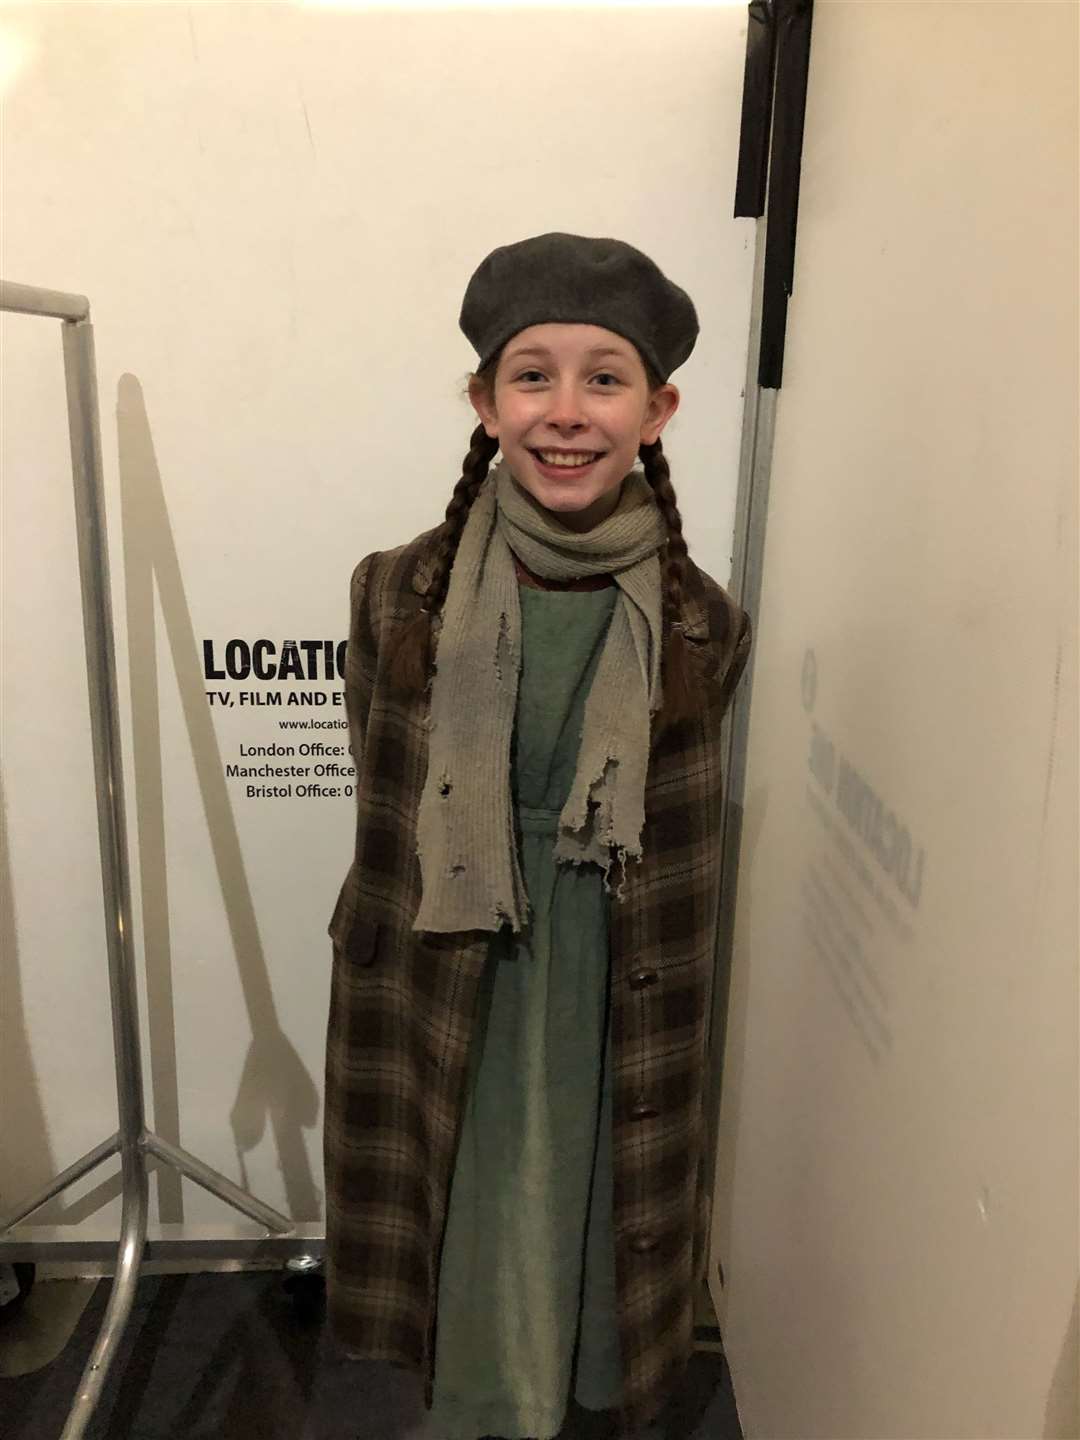 Sophie McDonnell (12), from Banff Academy, was on set as an extra in Peaky Blinders. She plays a young French/Canadian girl from the island of Miquelon.